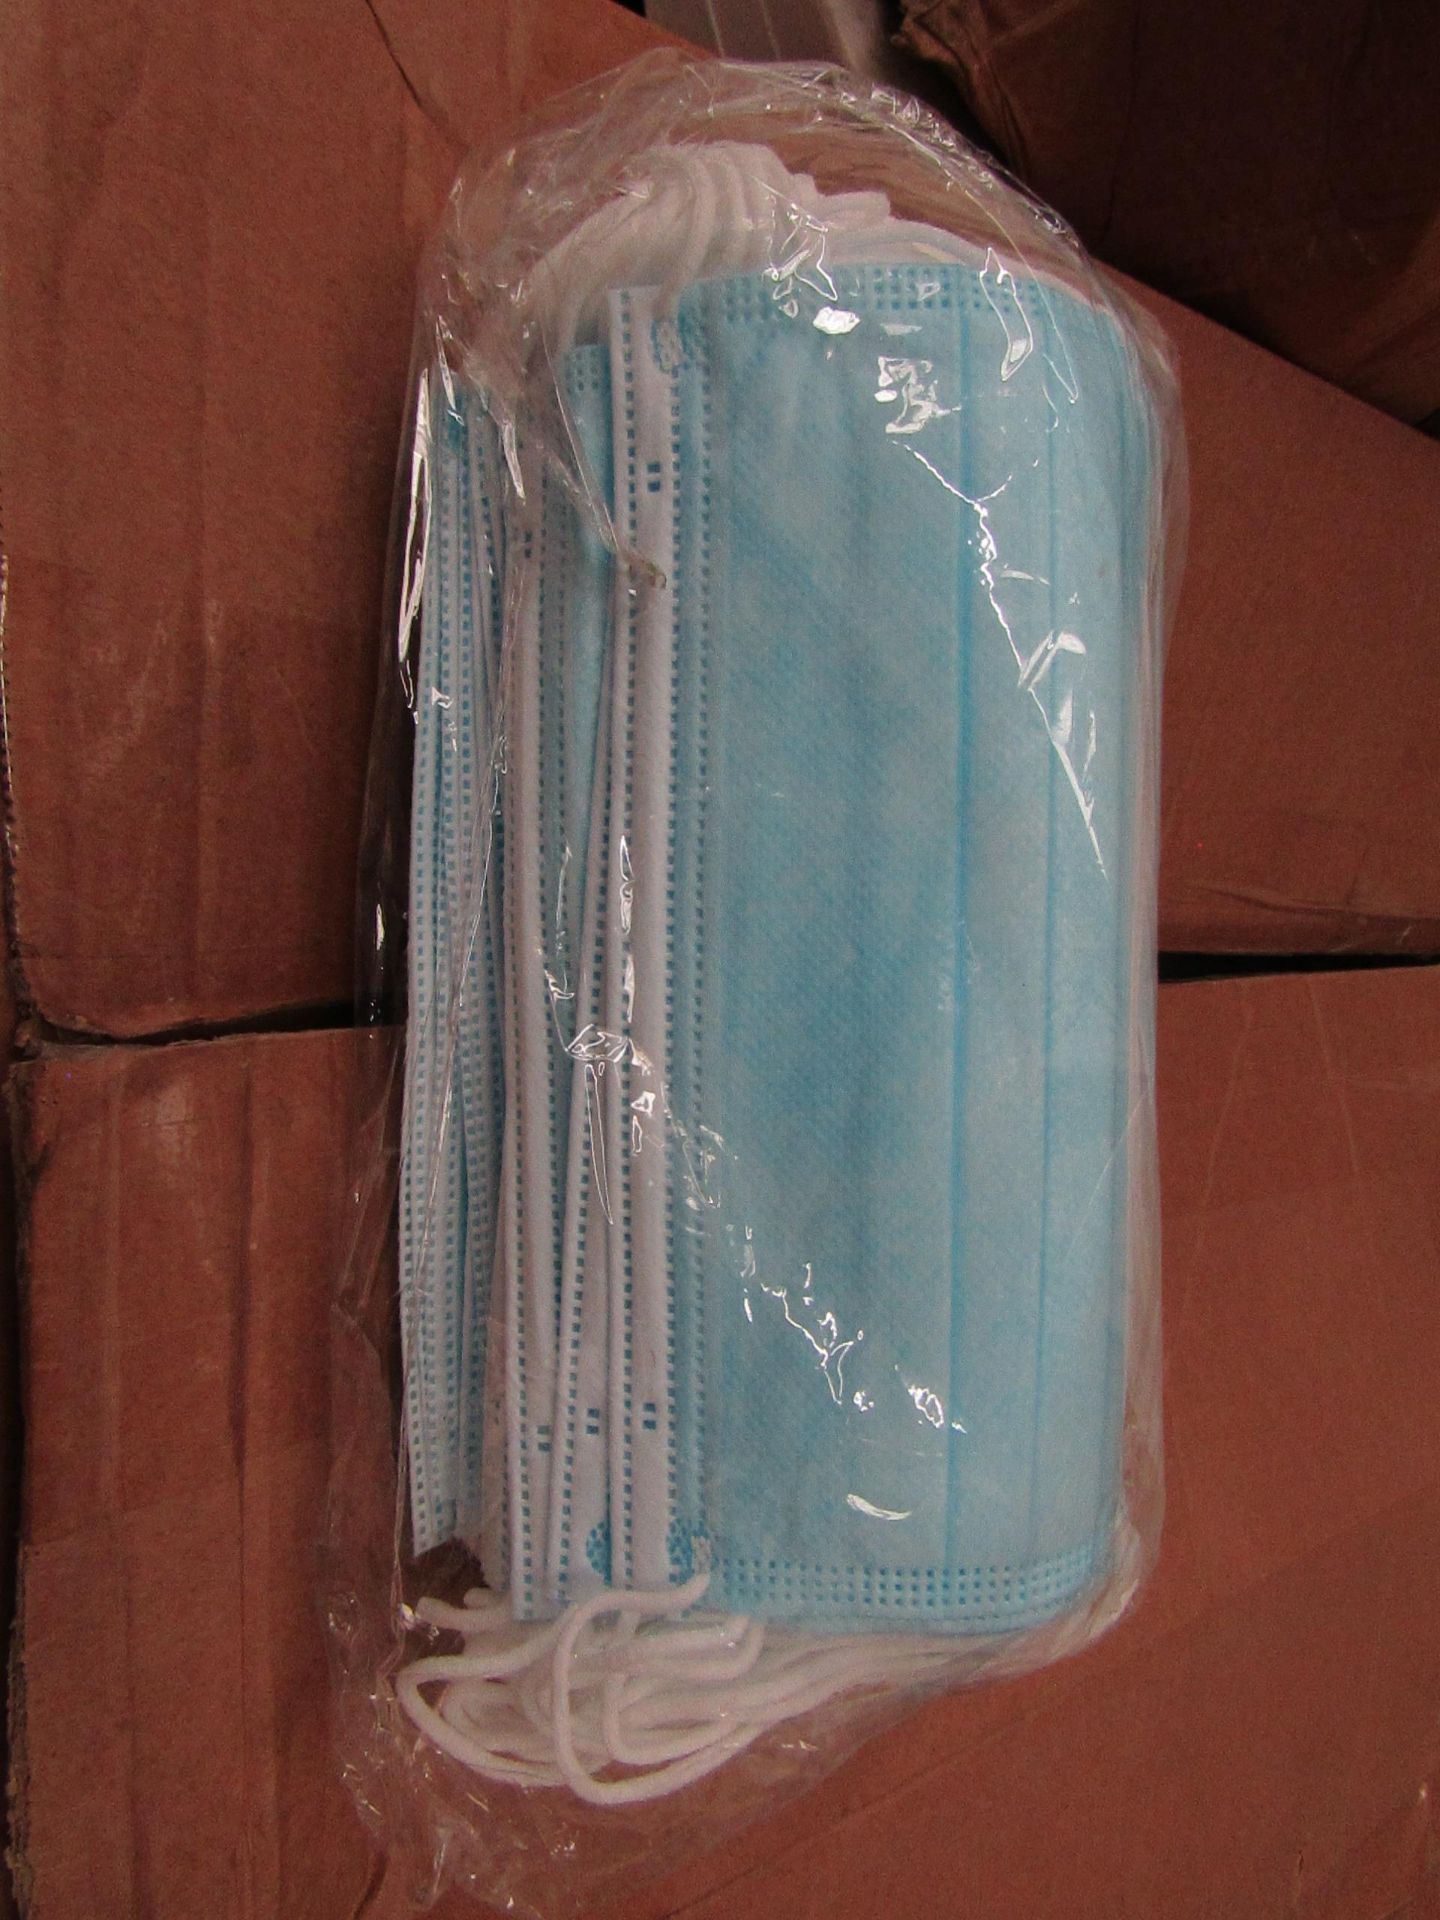 4x Pack of 50x disposable face masks - New & Packaged.